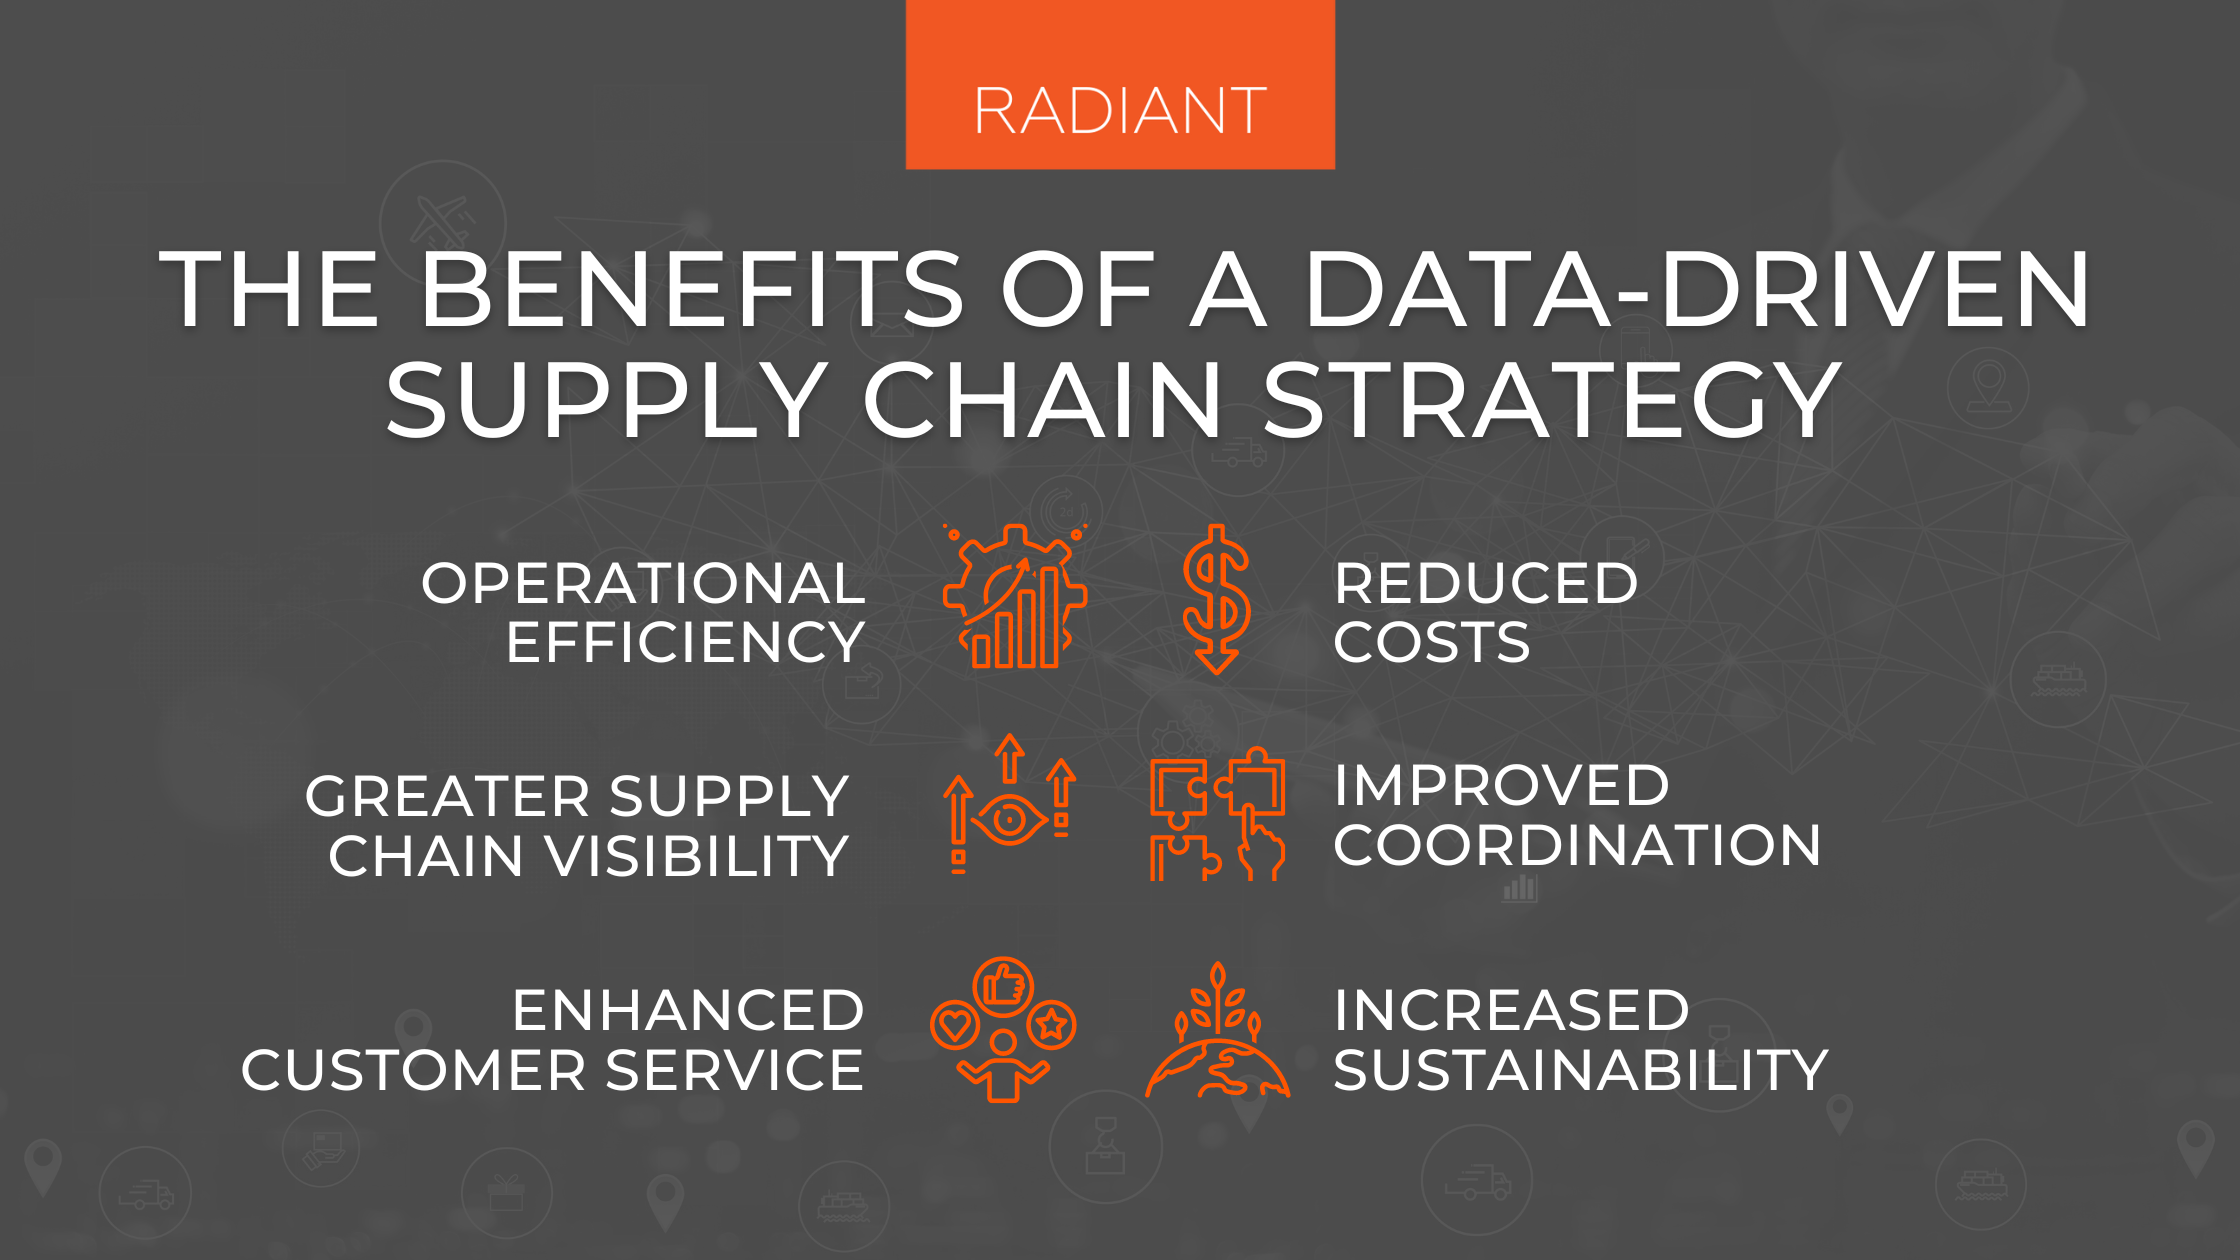 Data Science In Supply Chain - Data Driven Strategies - Supply Chain Data Analytics - Data Driven Supply Chain - Data Driven Supply Chain Management Stategy - Data Driven Supply Chain Management Strategies - Supply Chain Data - Supply Chain Data Strategy - Data Supply Chain - Data Analysis Supply Chain Management - Supply Chain Data Management Software - Data Science Supply Chain - Supply Chain Strategy - Data Driven Supply Chain Strategy - Global Supply Chain - Supply Chain Data Sources - Advanced Analytics